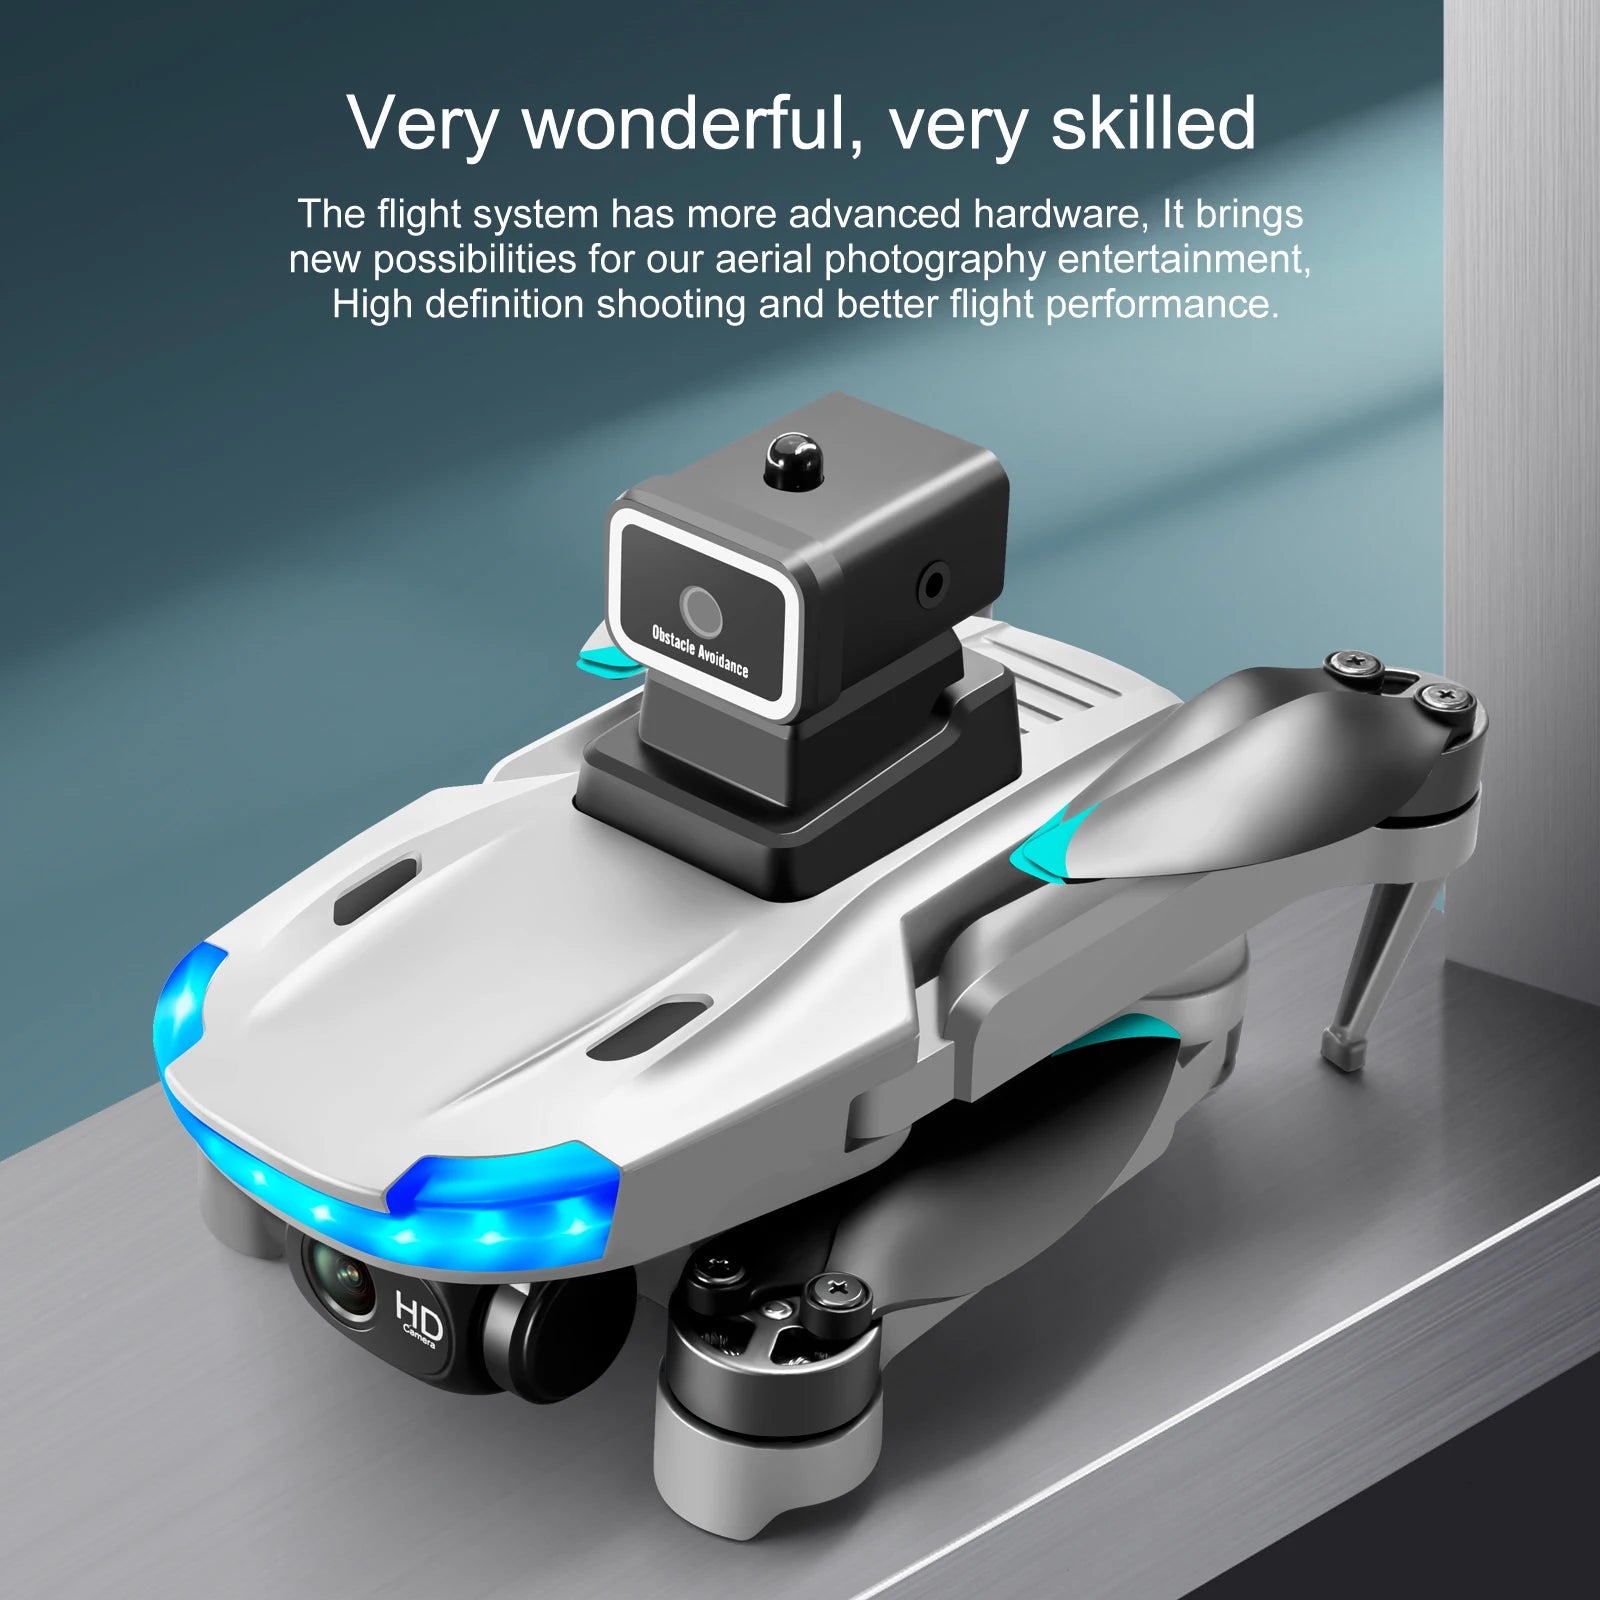 S138 Drone, the flight system has more advanced hardware, it brings new possibilities for our